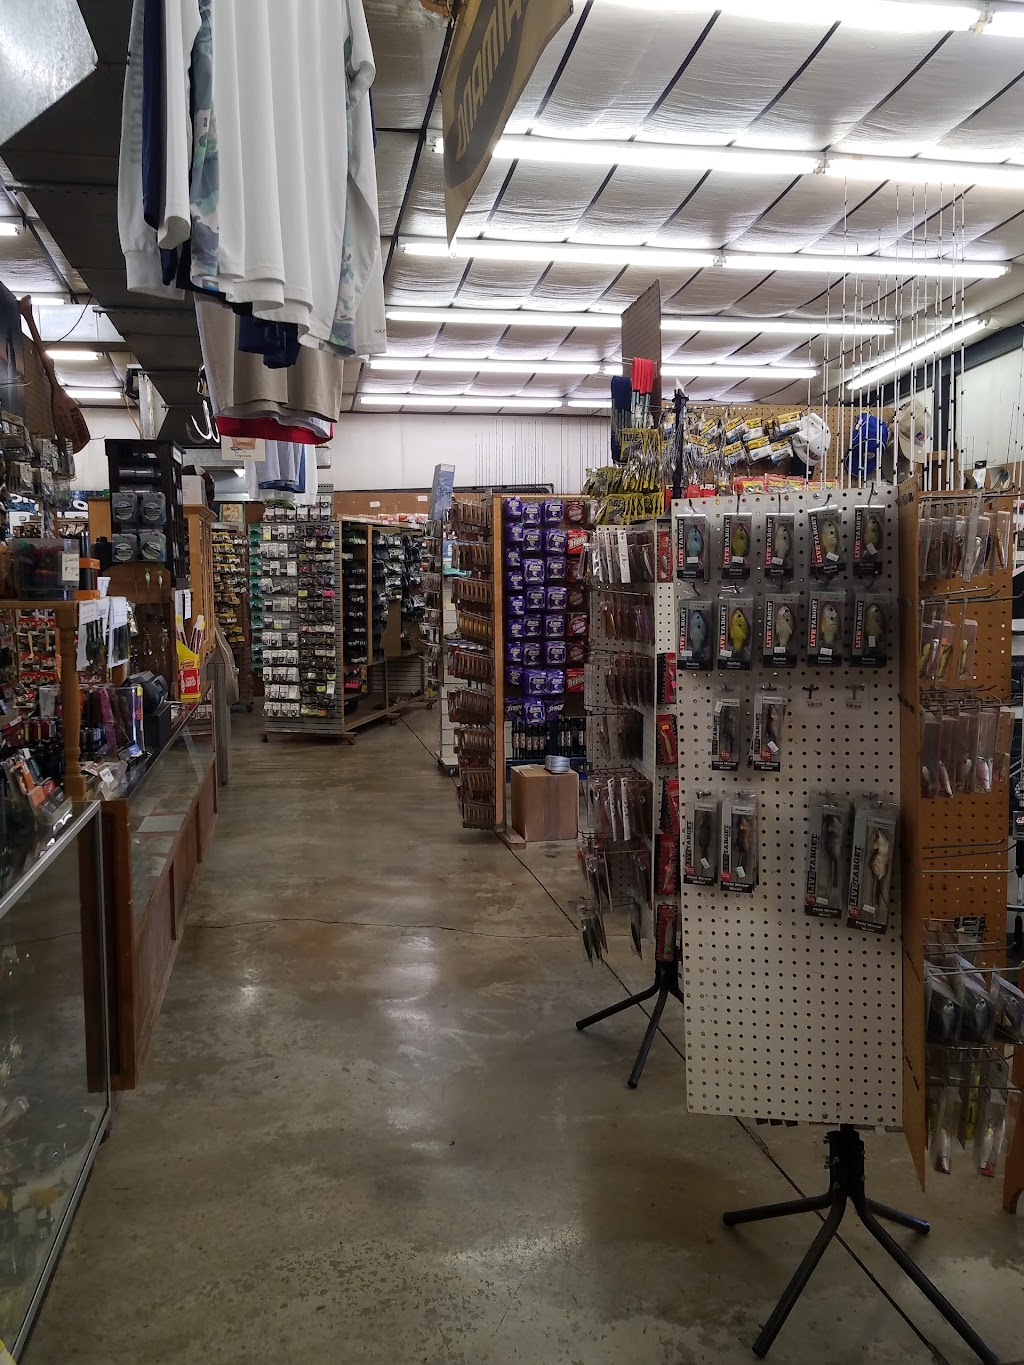 Flippers Bait & Tackle | 200 Odoms Bend Rd, Gallatin, TN 37066 | Phone: (615) 452-7719